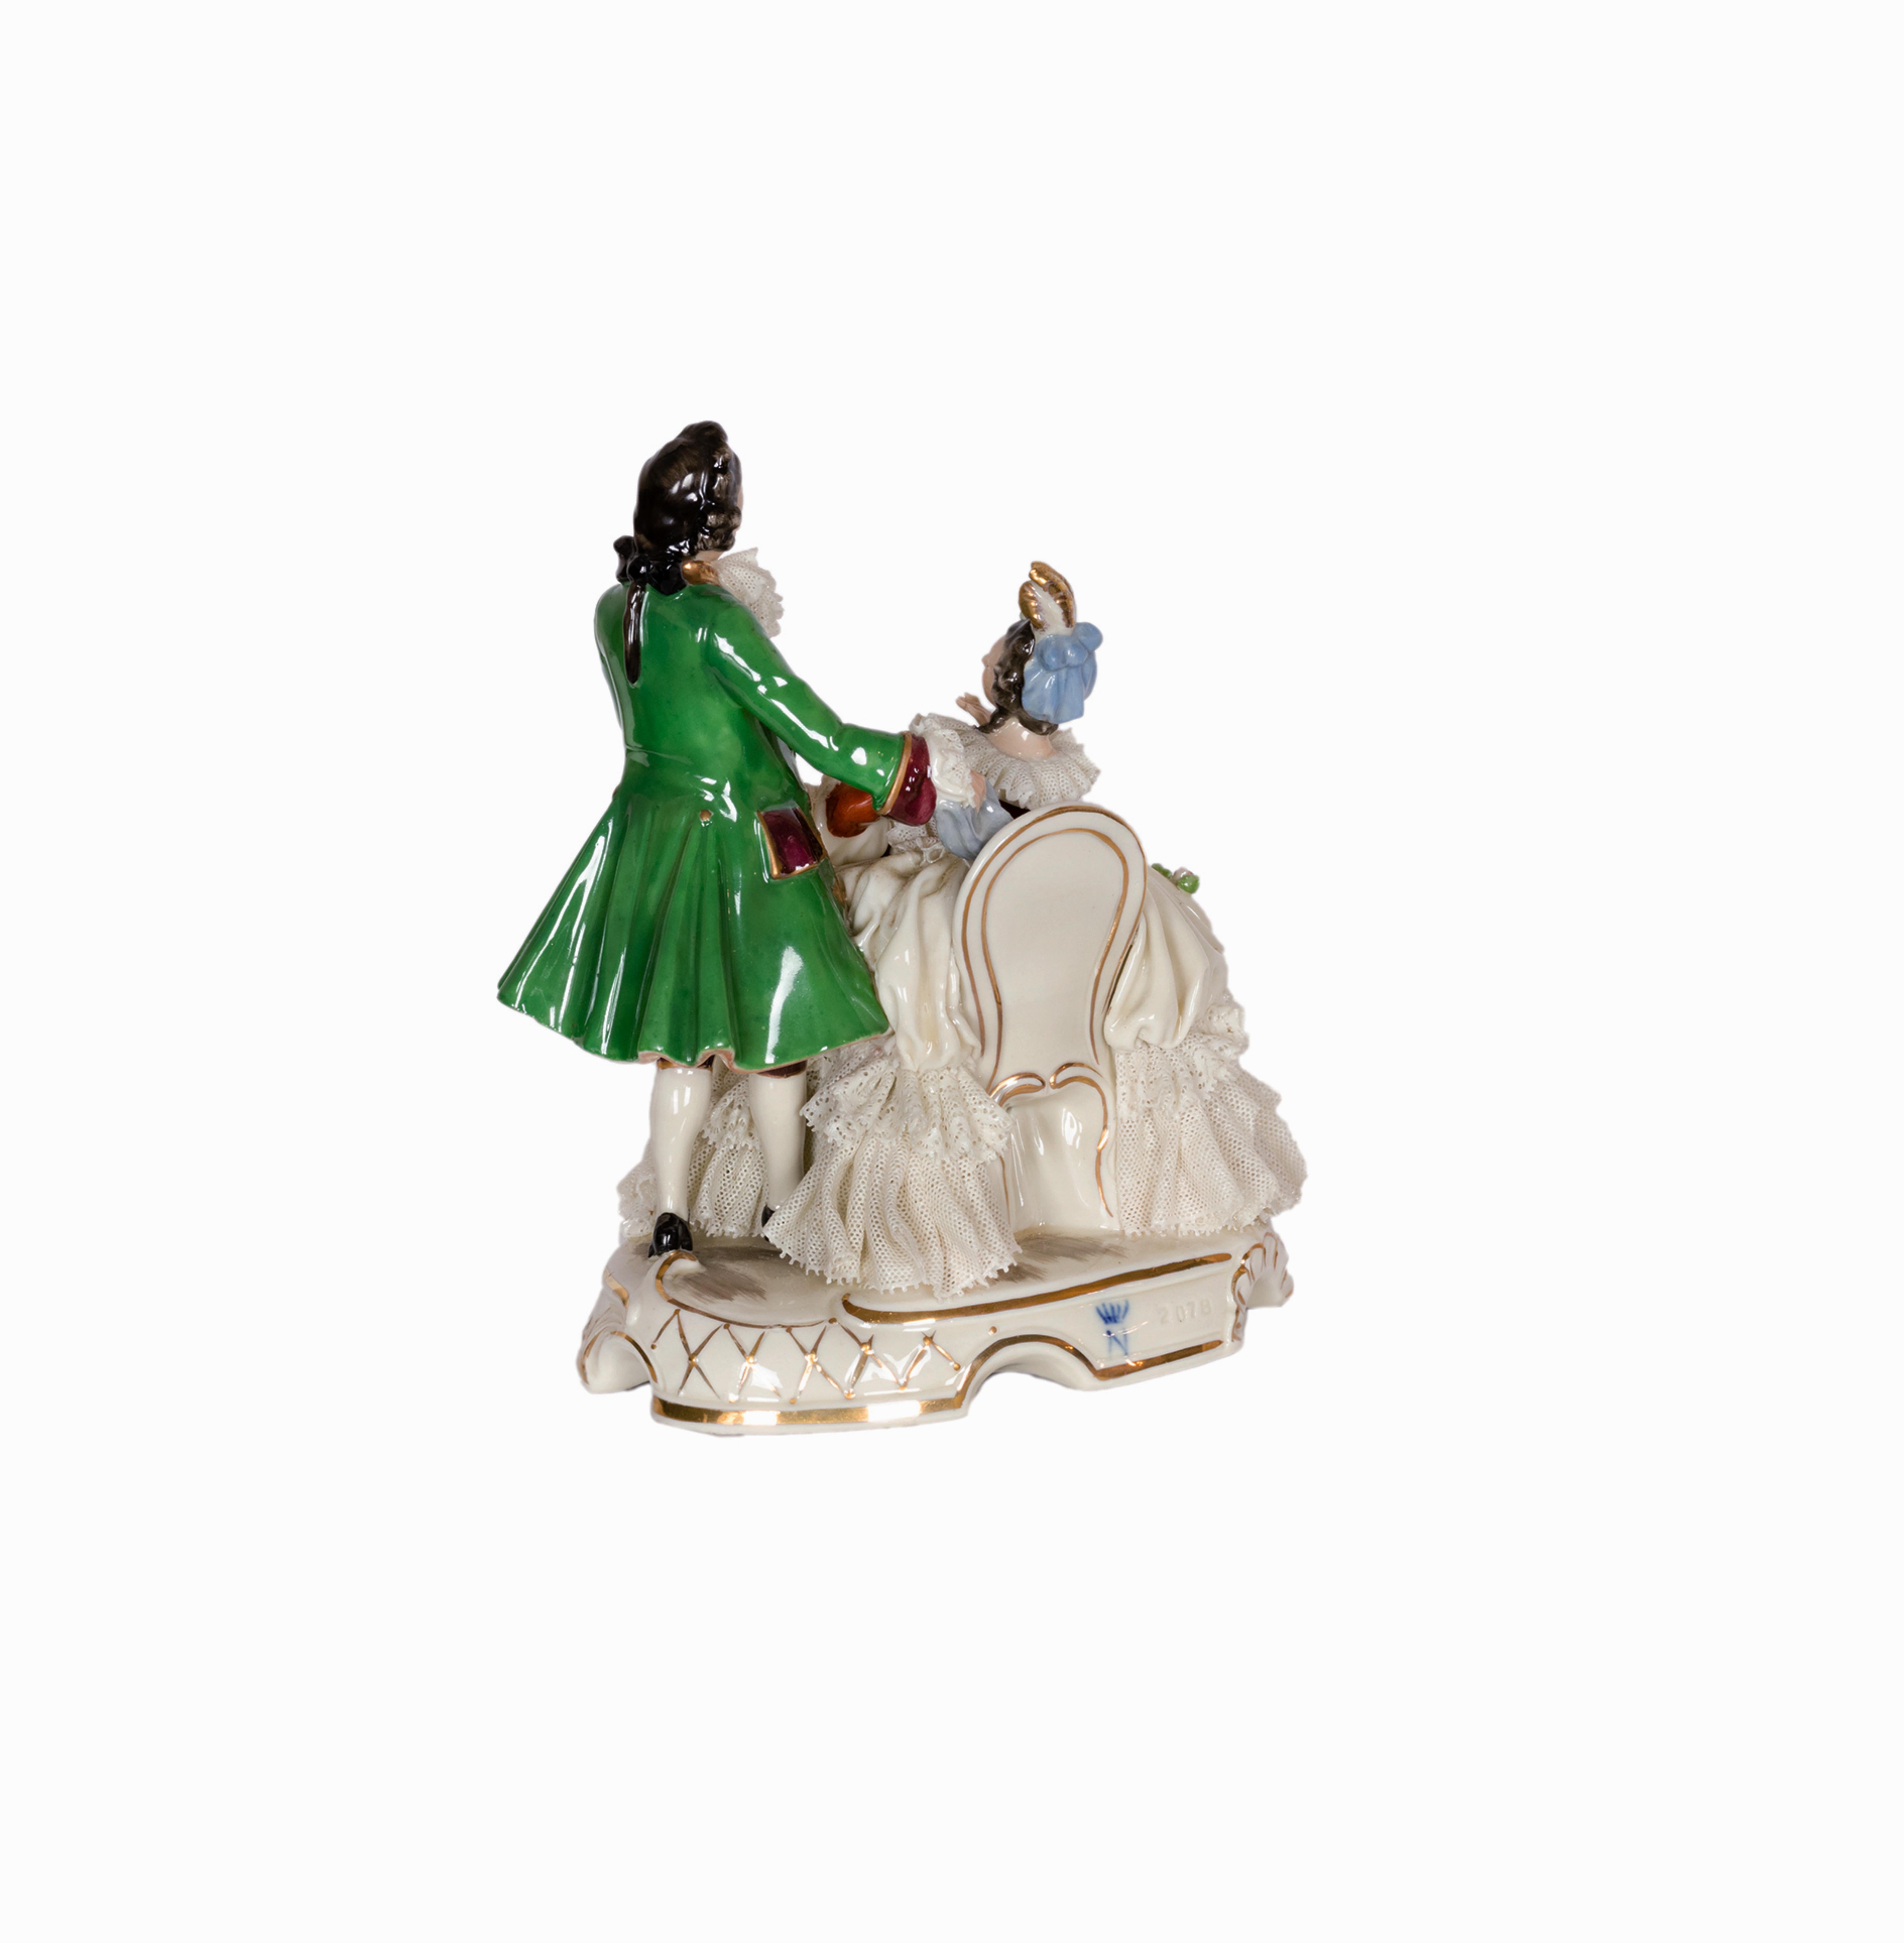 A Neapolitan Capodimonte porcelain in the Baroque style depicting a french salon scene, a woman seated in an armchair playing the lute and a male admirer trying to impress her, marked 'N ' and '2078' in the base, as you can see. and photos